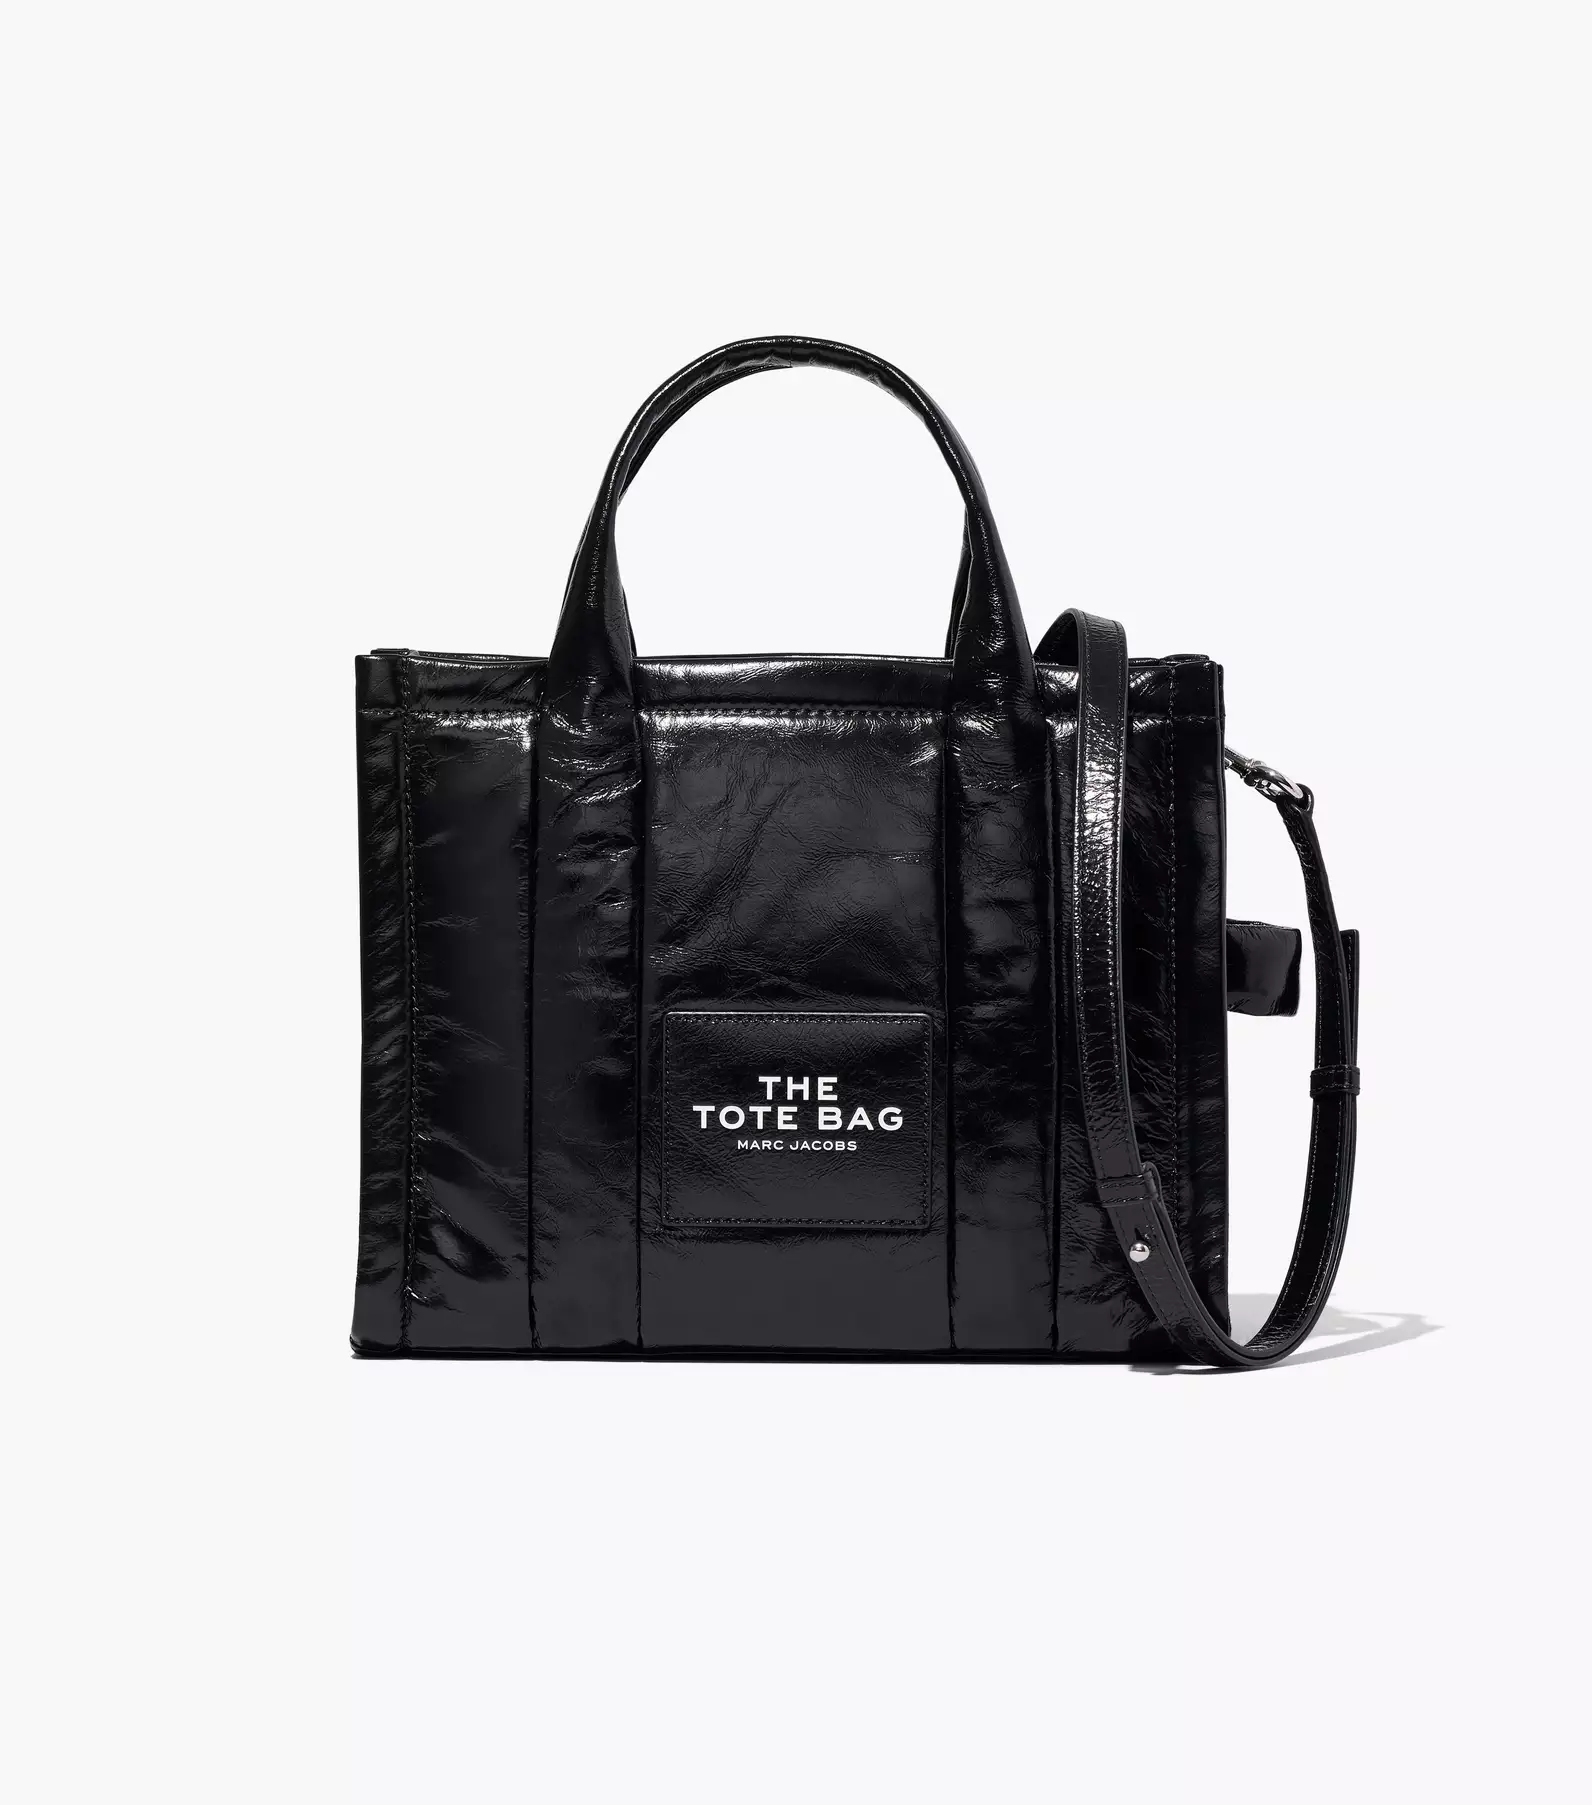 The Shiny Crinkle Medium Tote Bag | Marc Jacobs | Official Site